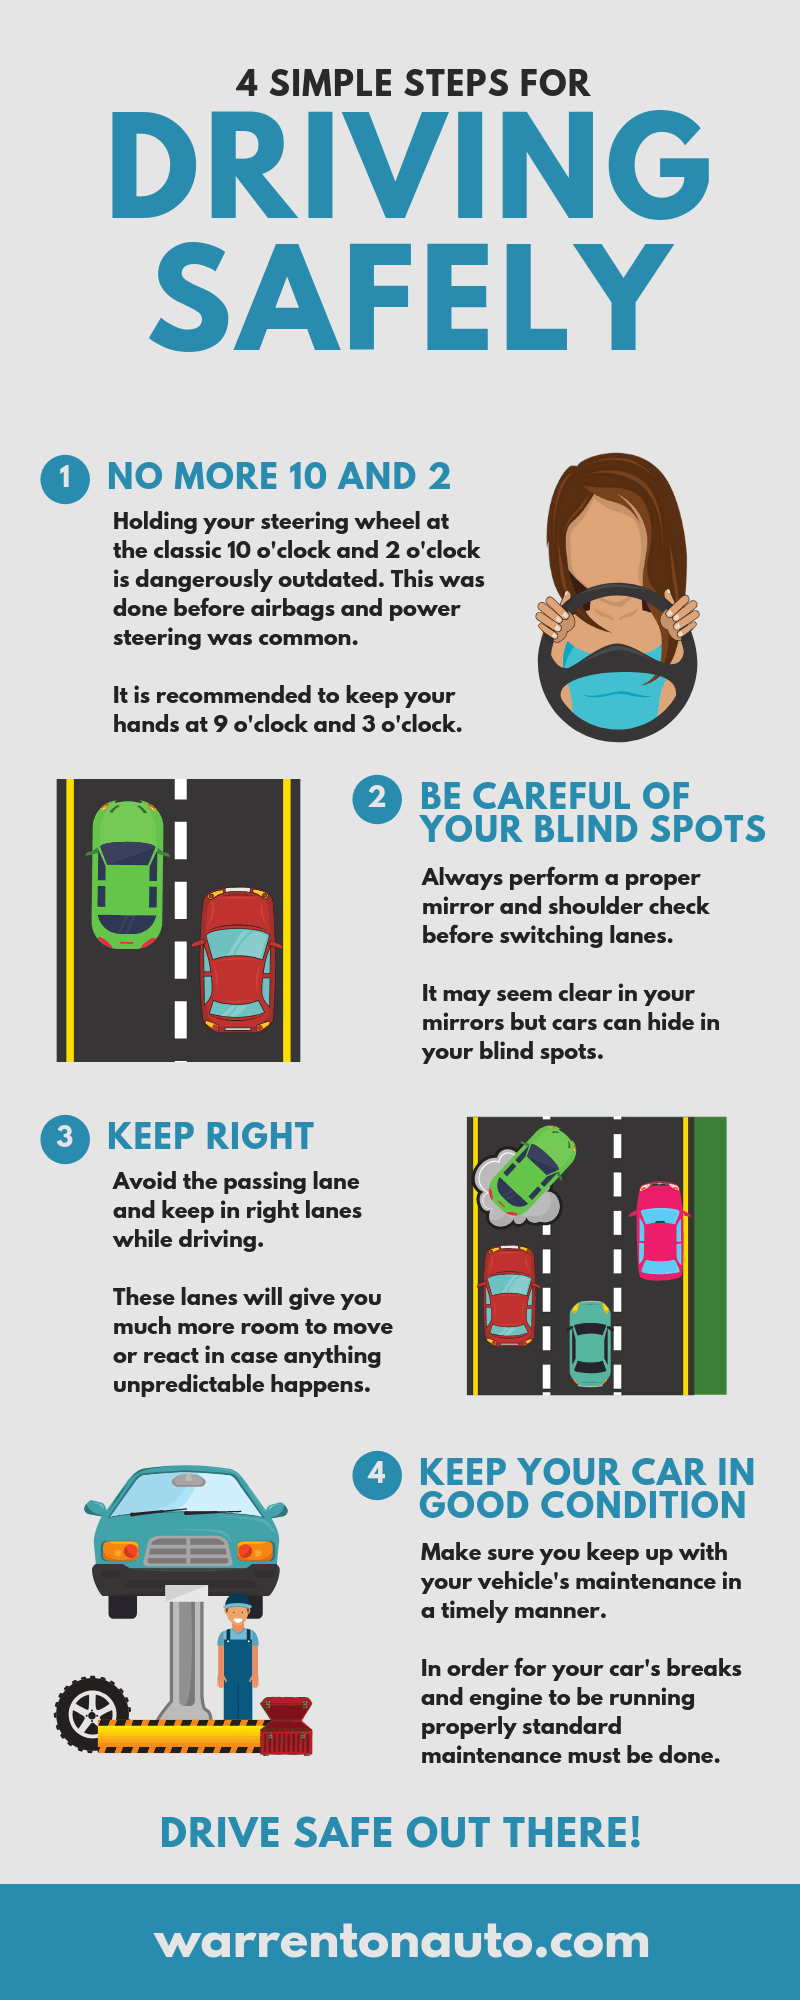 Useful Driving Tips for a Short Person